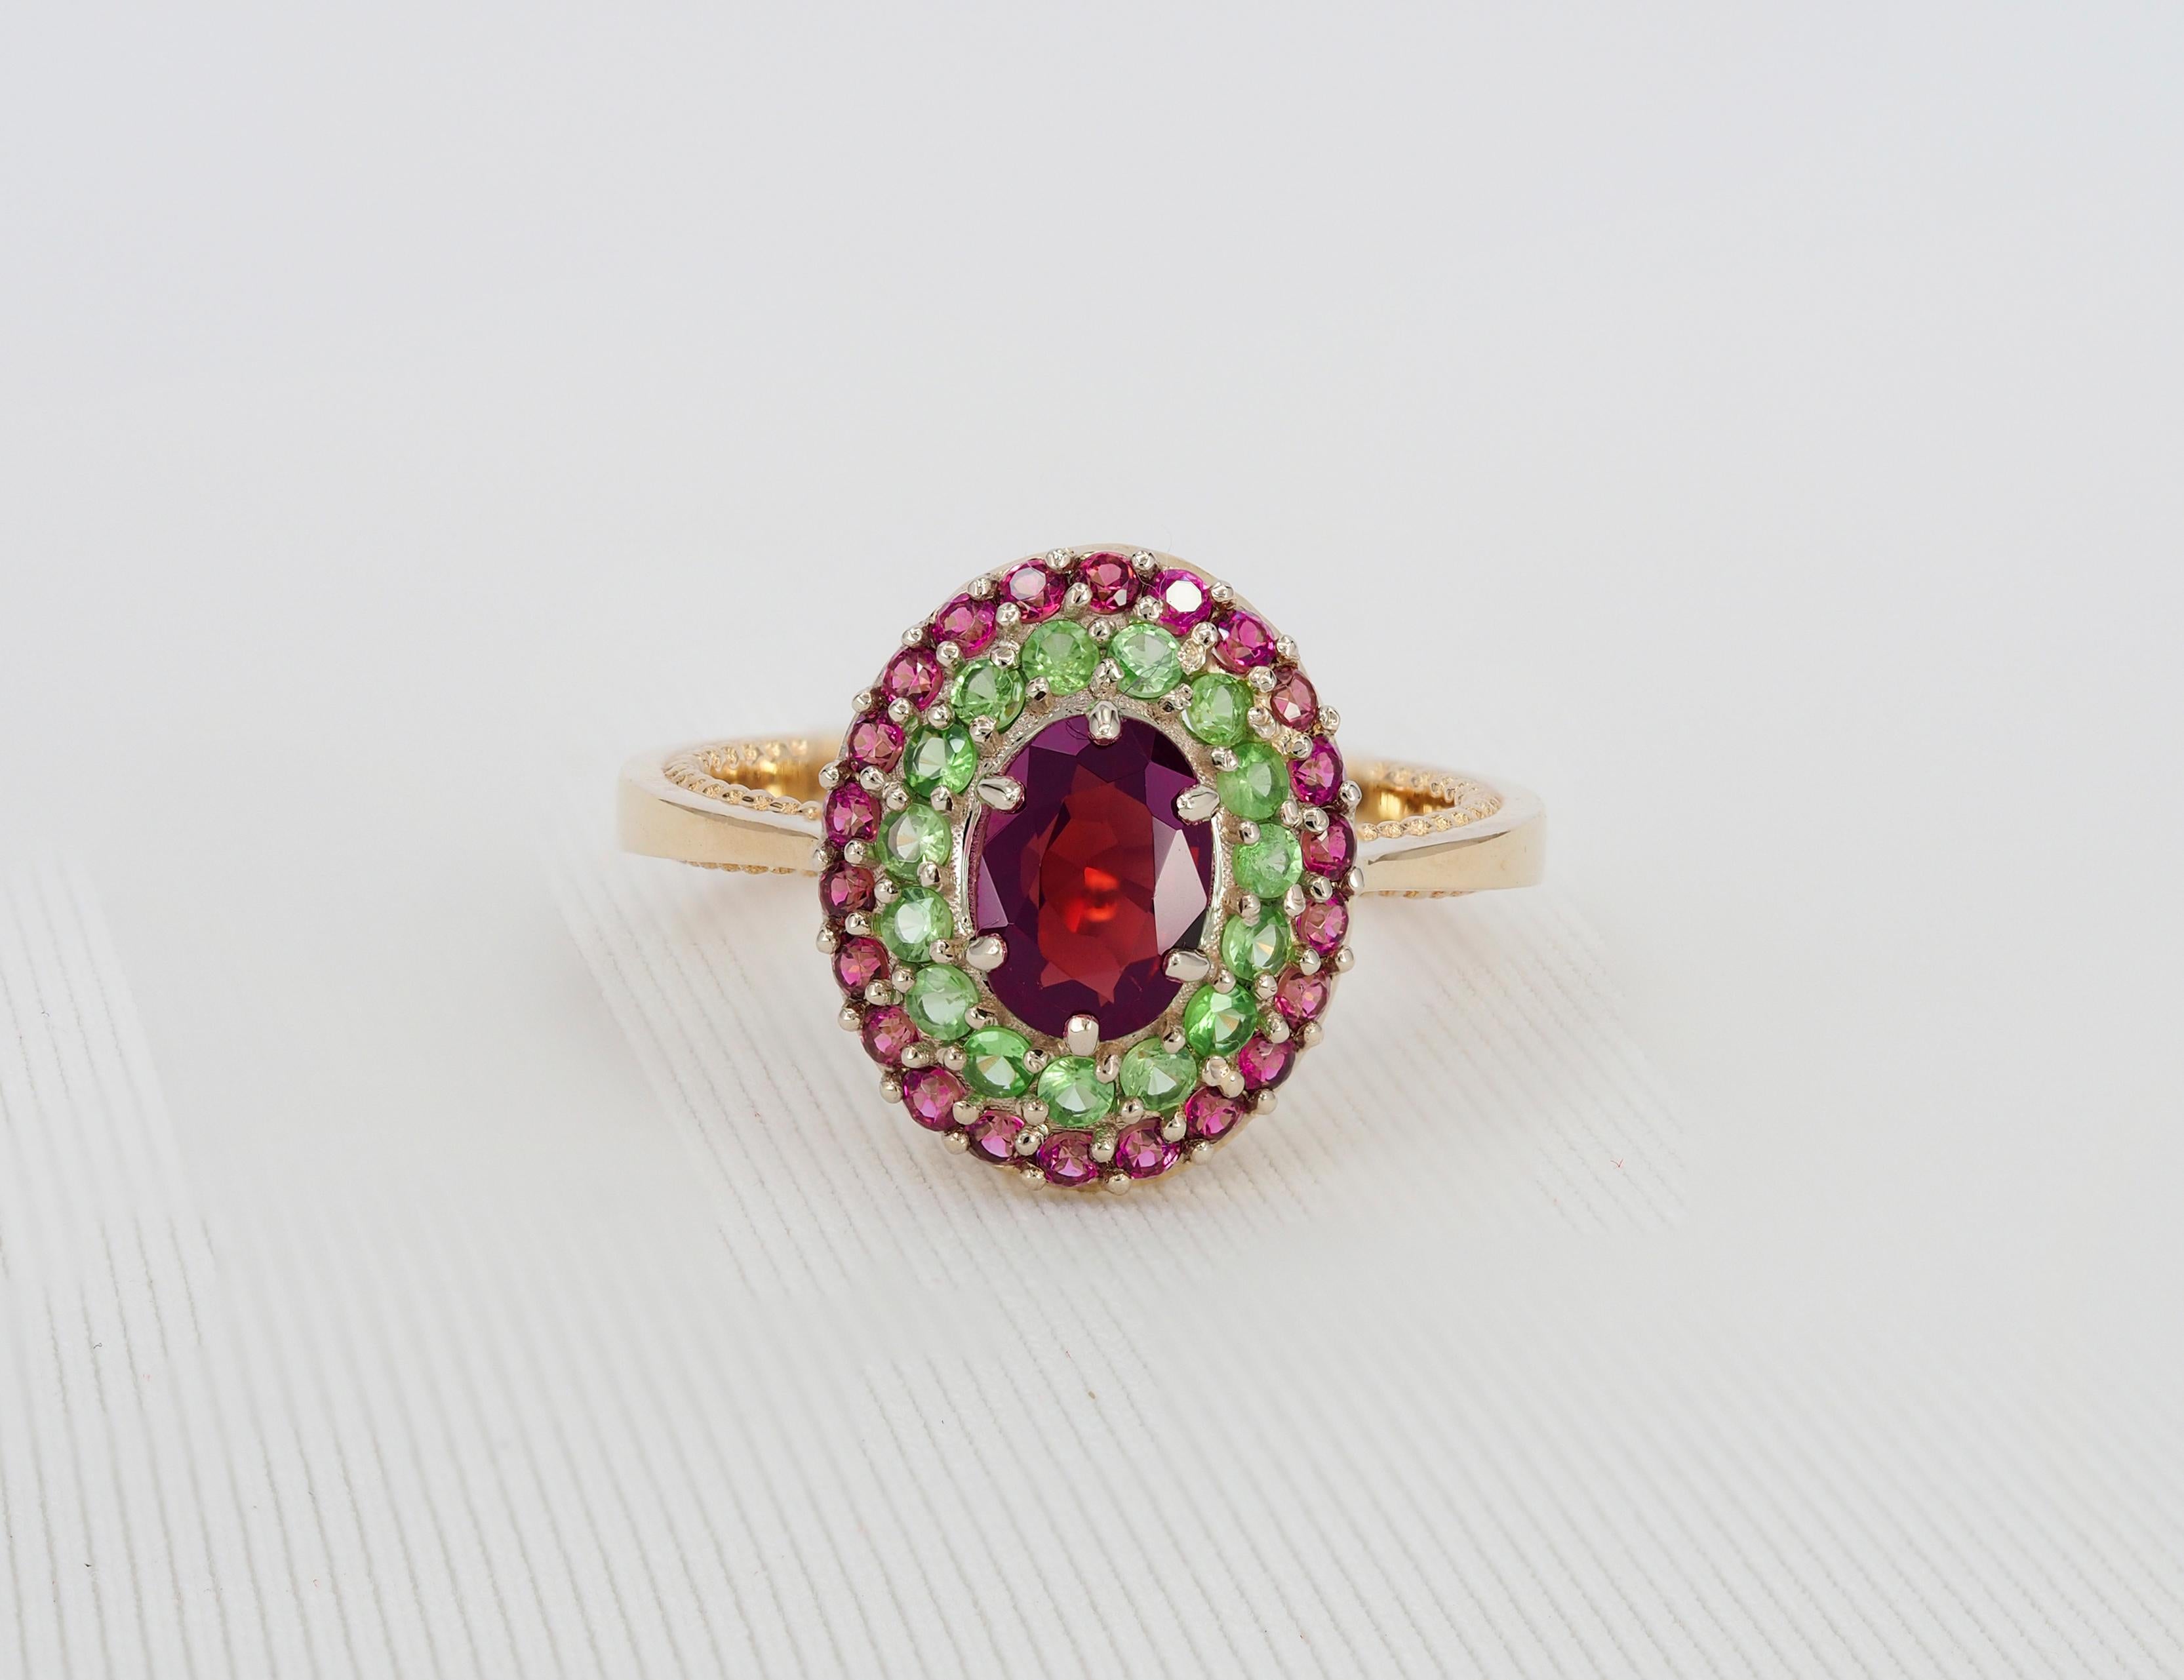 Garnet ring with side tsavorites and rubies.

Metal: 14k gold
Weight - 3.90 gr. depends from size

Central stone:
Garnet - 1.22 ct
Measurements - 7.40 x 5.03 x 3.97 mm
Color- Dark Purple
Transparency -Transparent

Side stones:
Tsavorites - round